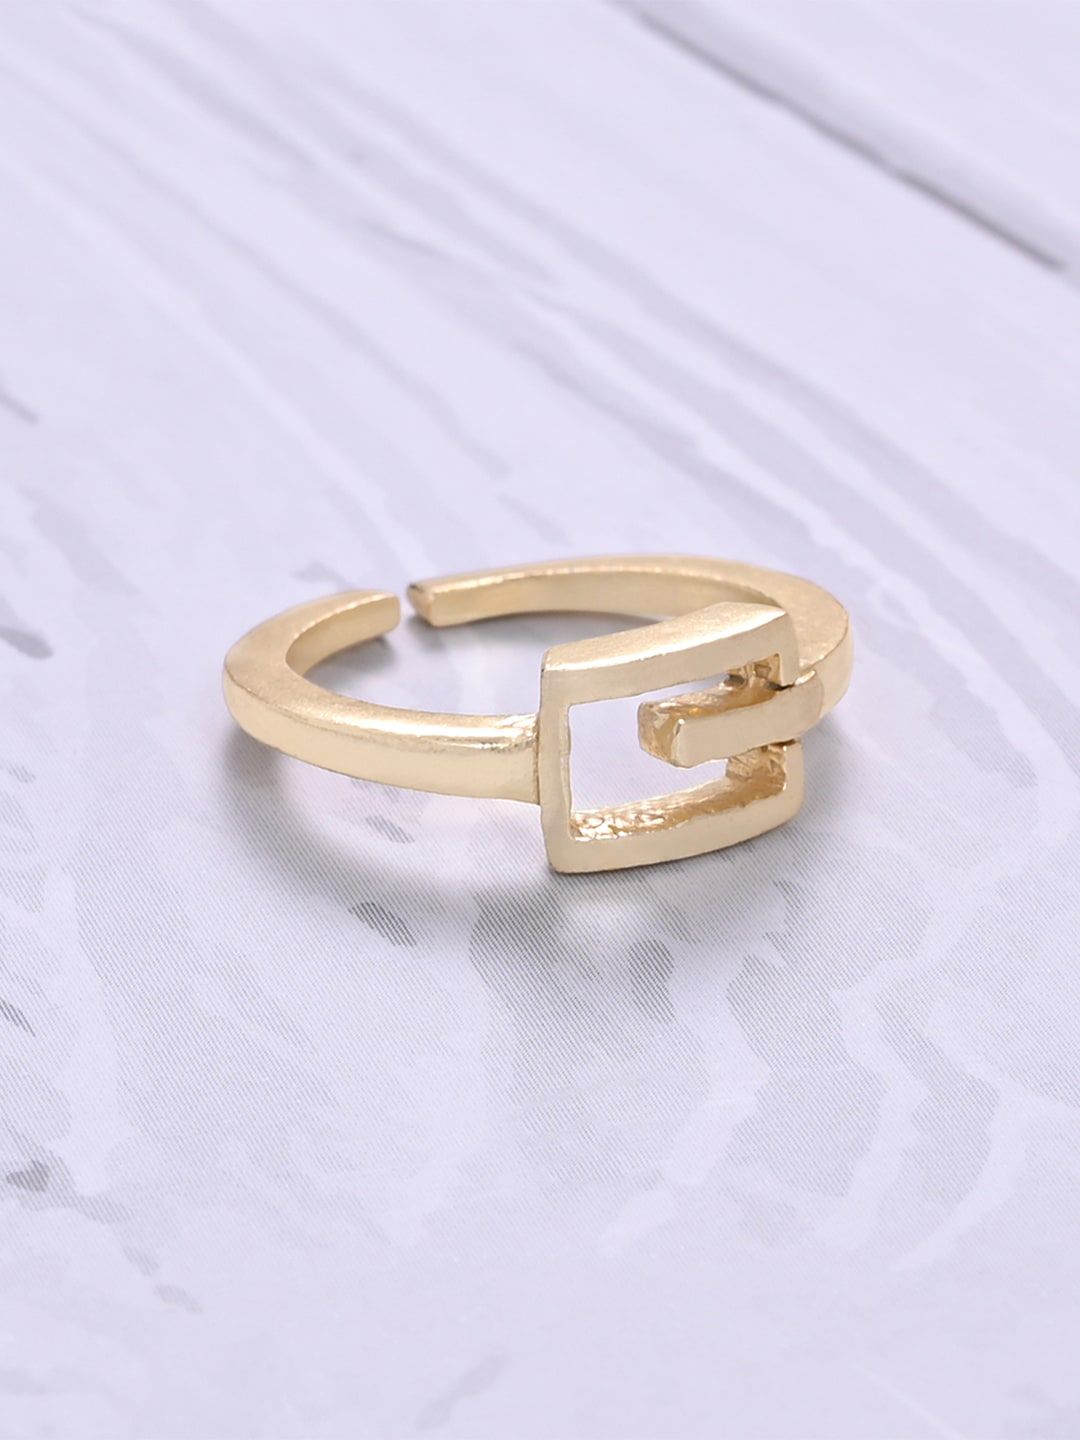 Mikoto by FableStreet Women Gold-Plated Adjustable Finger Ring Price in India